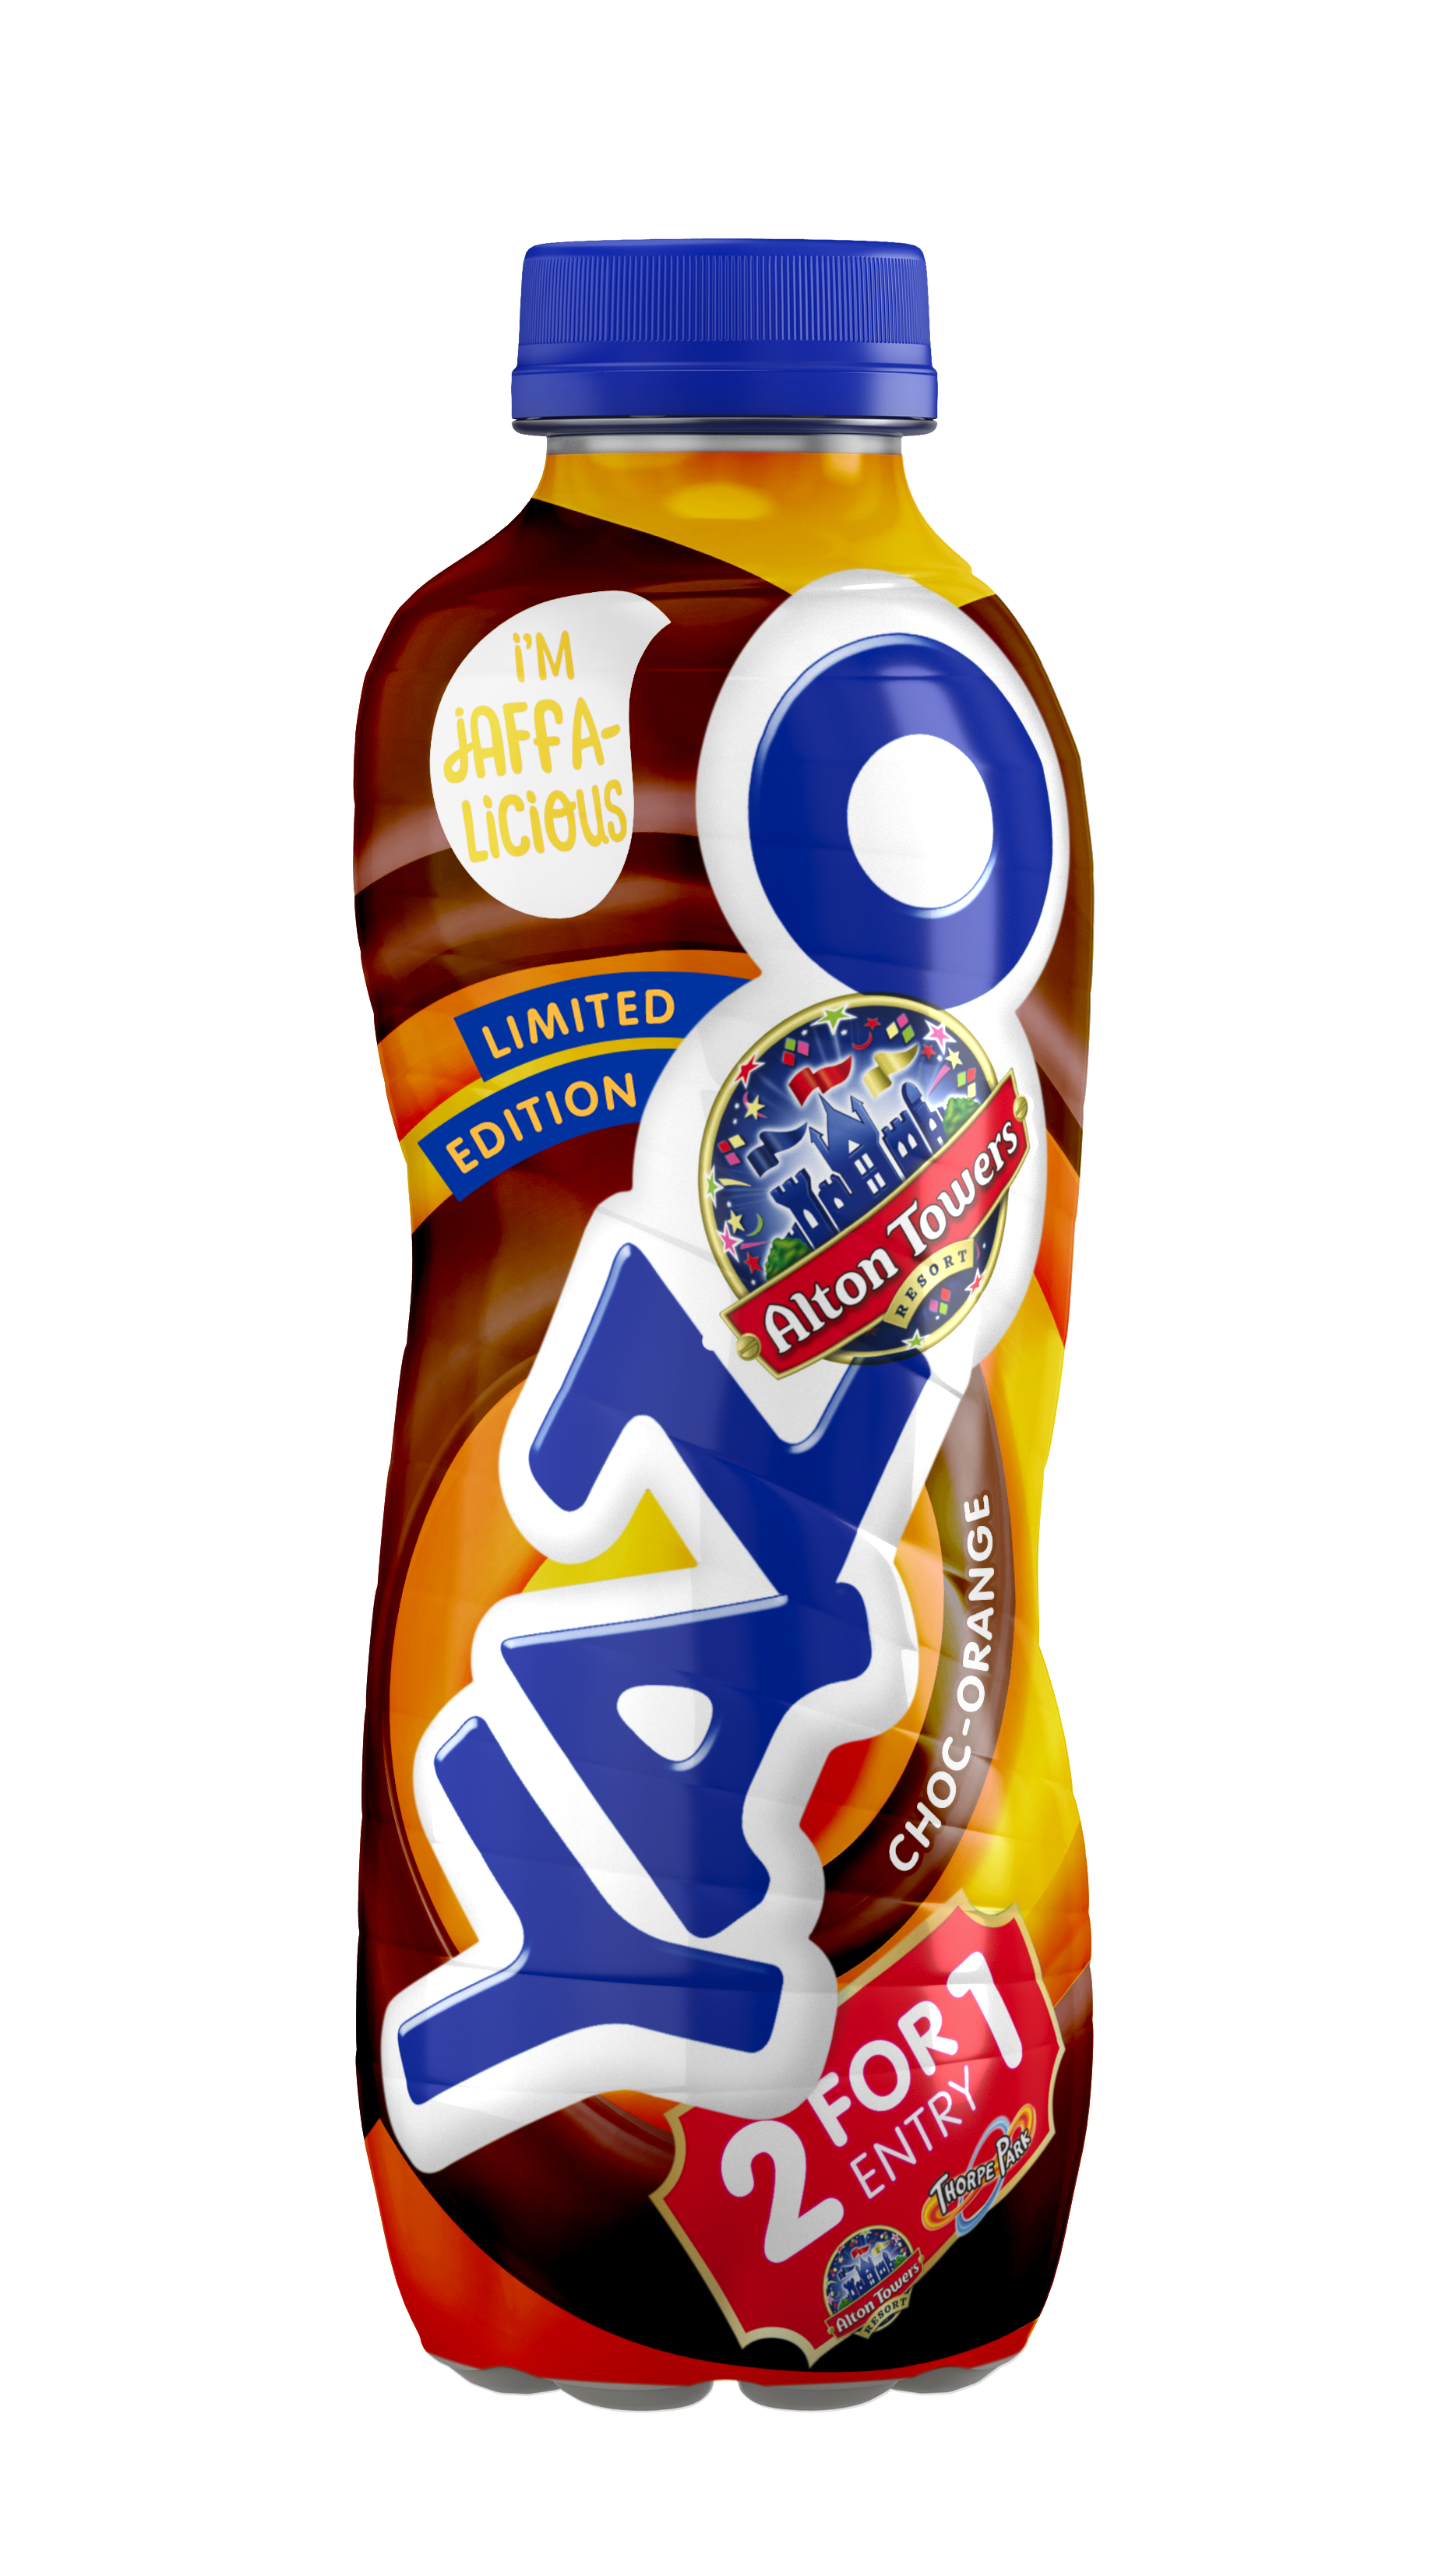 YAZOO shakes things up with new choc-orange limited-edition flavour